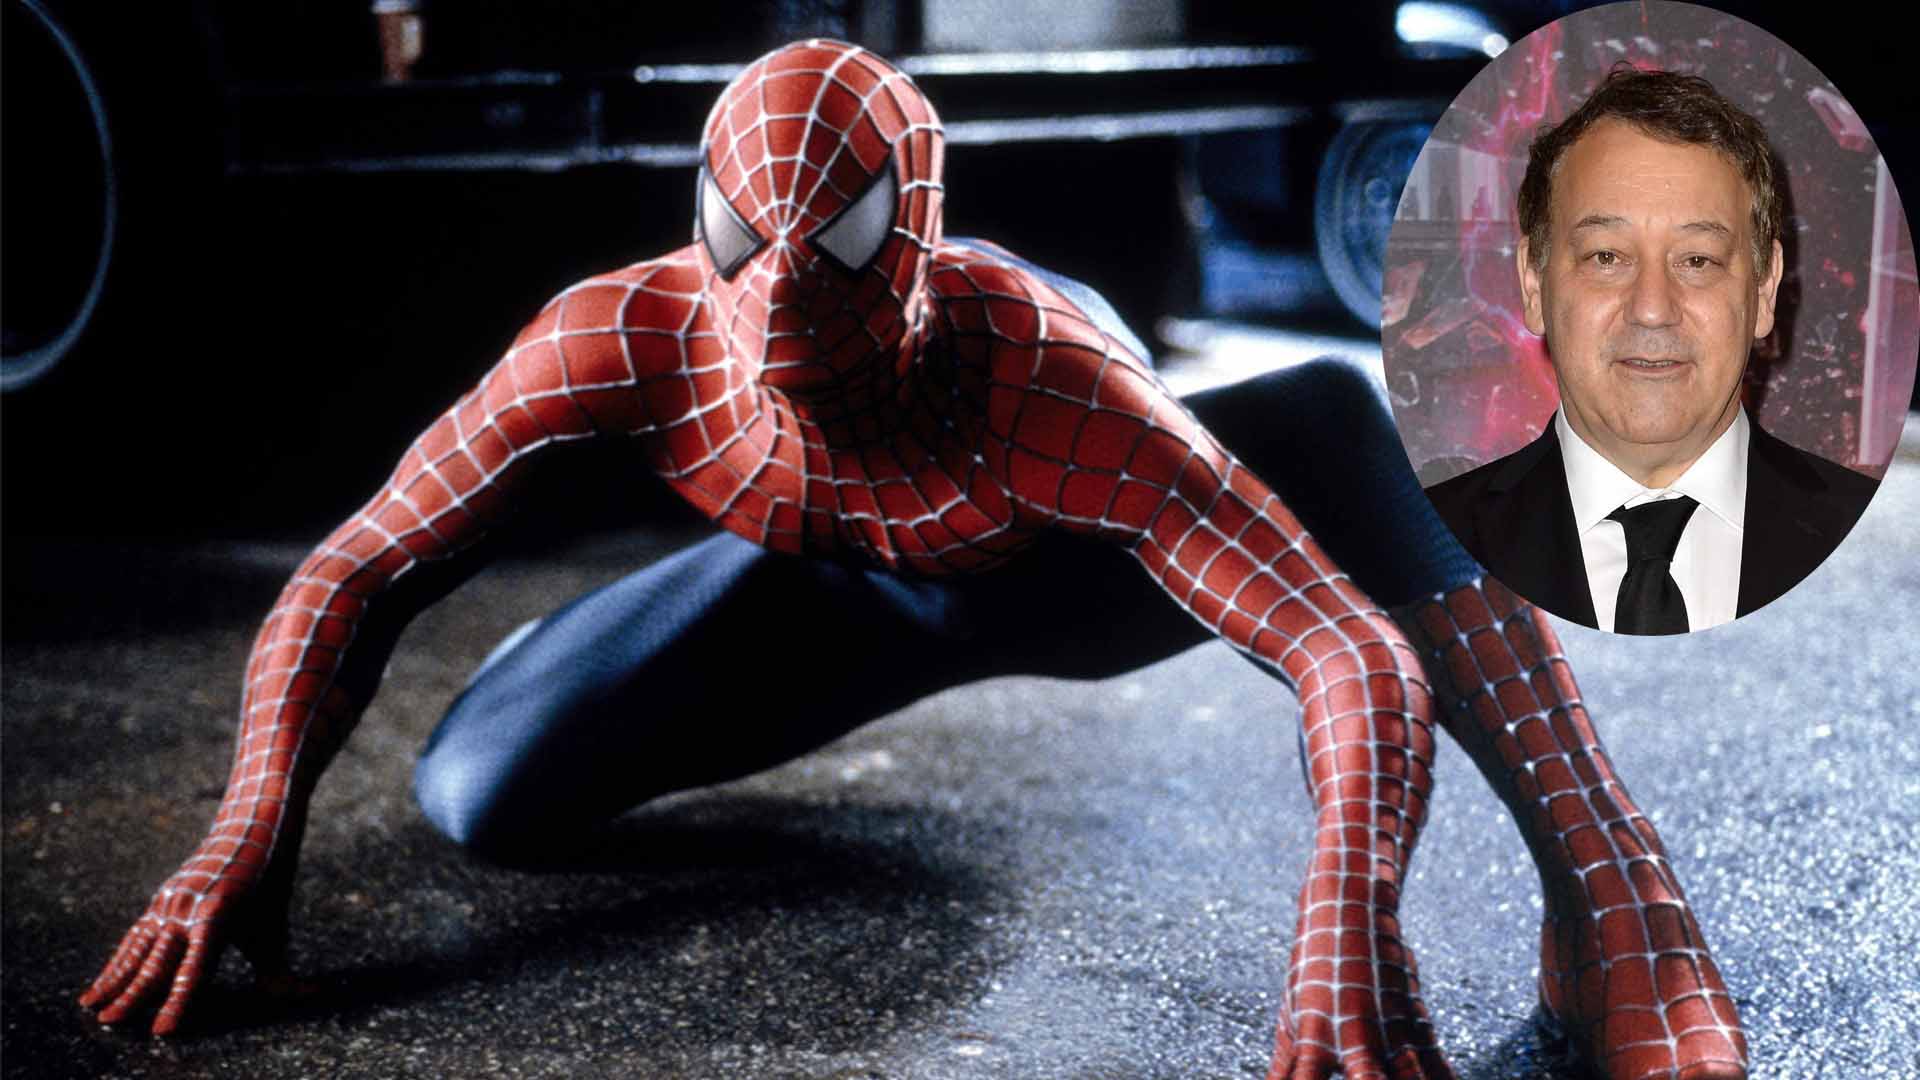 Spider-Man Turns 20: Sam Raimi Was Told By Agent That The Studio Had 18 Directors They Would " Rather Have" Than Him